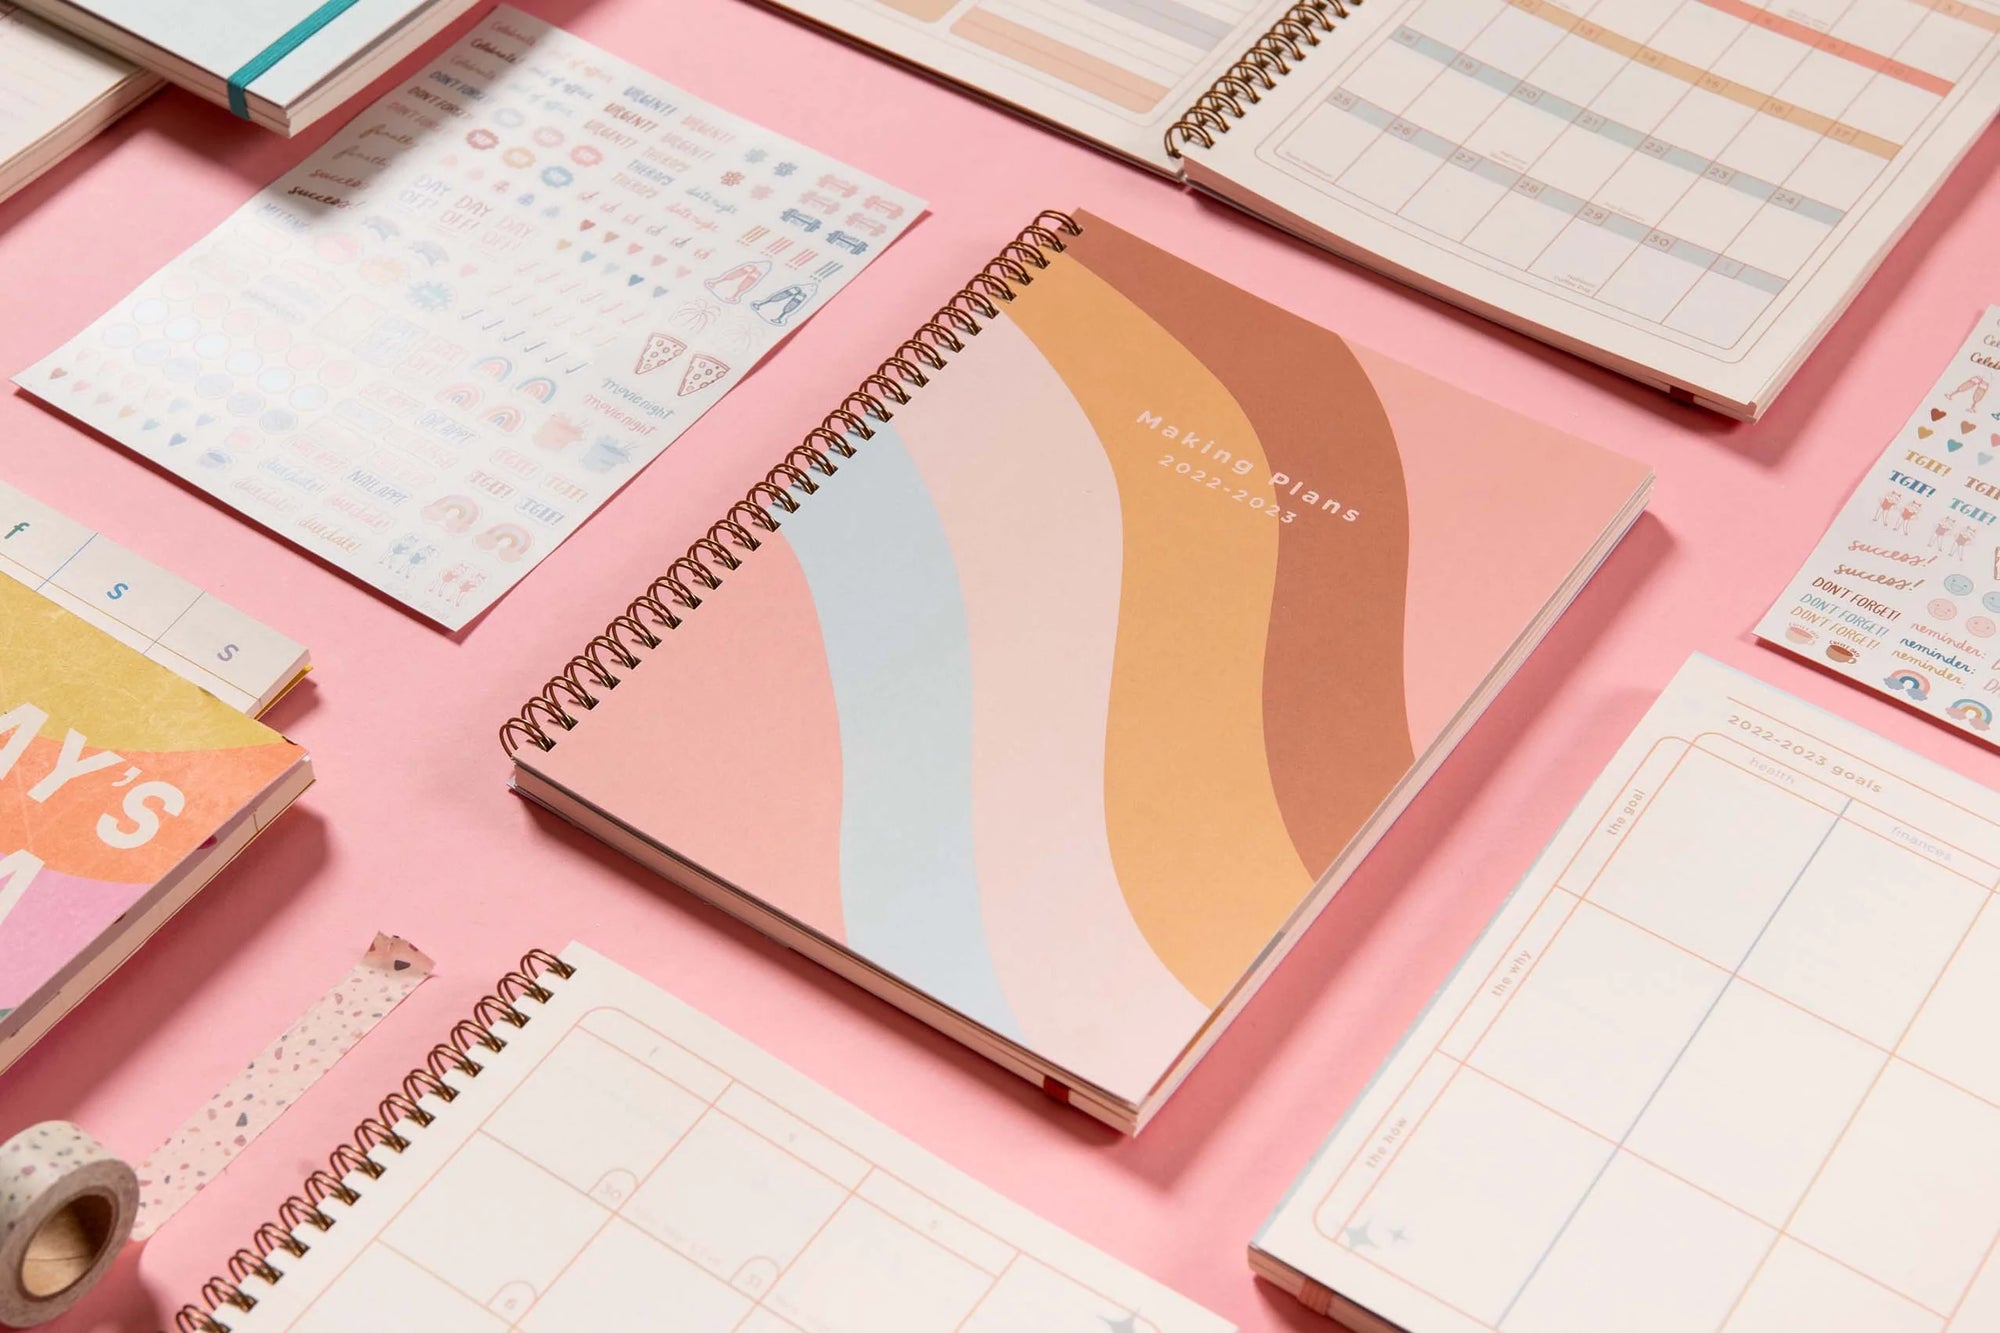 The Color Block Academic Planner by Talking Out of Turn